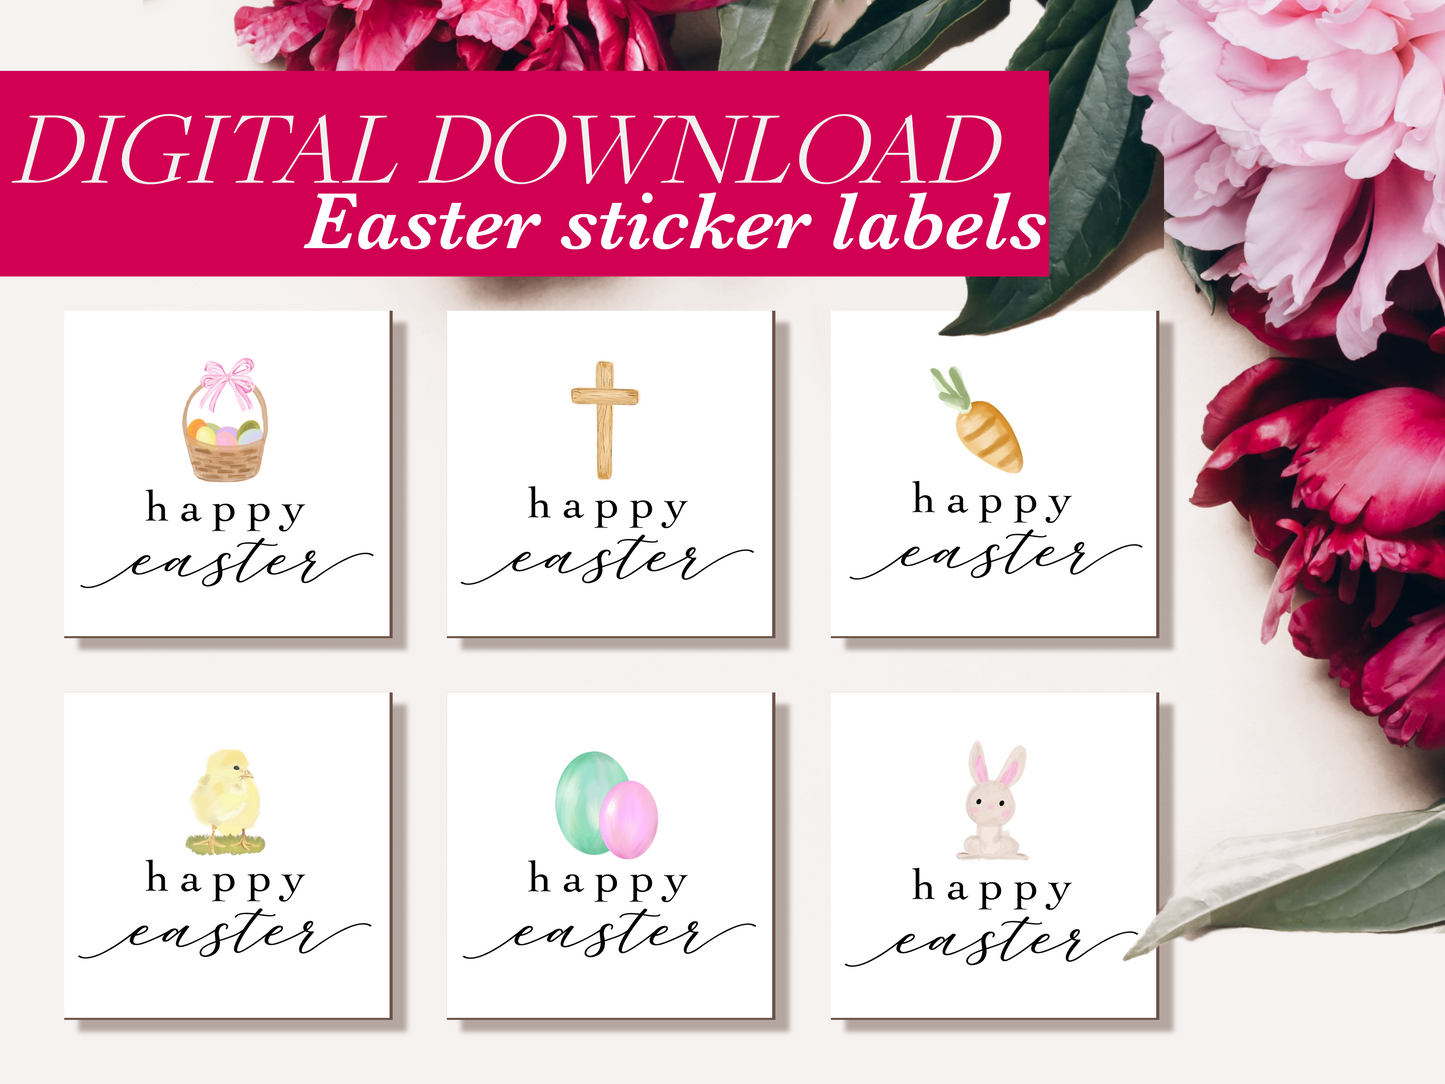 Digital Download - Happy Easter Stickers, Easter Sticker Label, Easter Sticker Gift Tag, Downloadable Easter Sticker Gift Tag, Avery Label Easter Watercolor Gift Tag